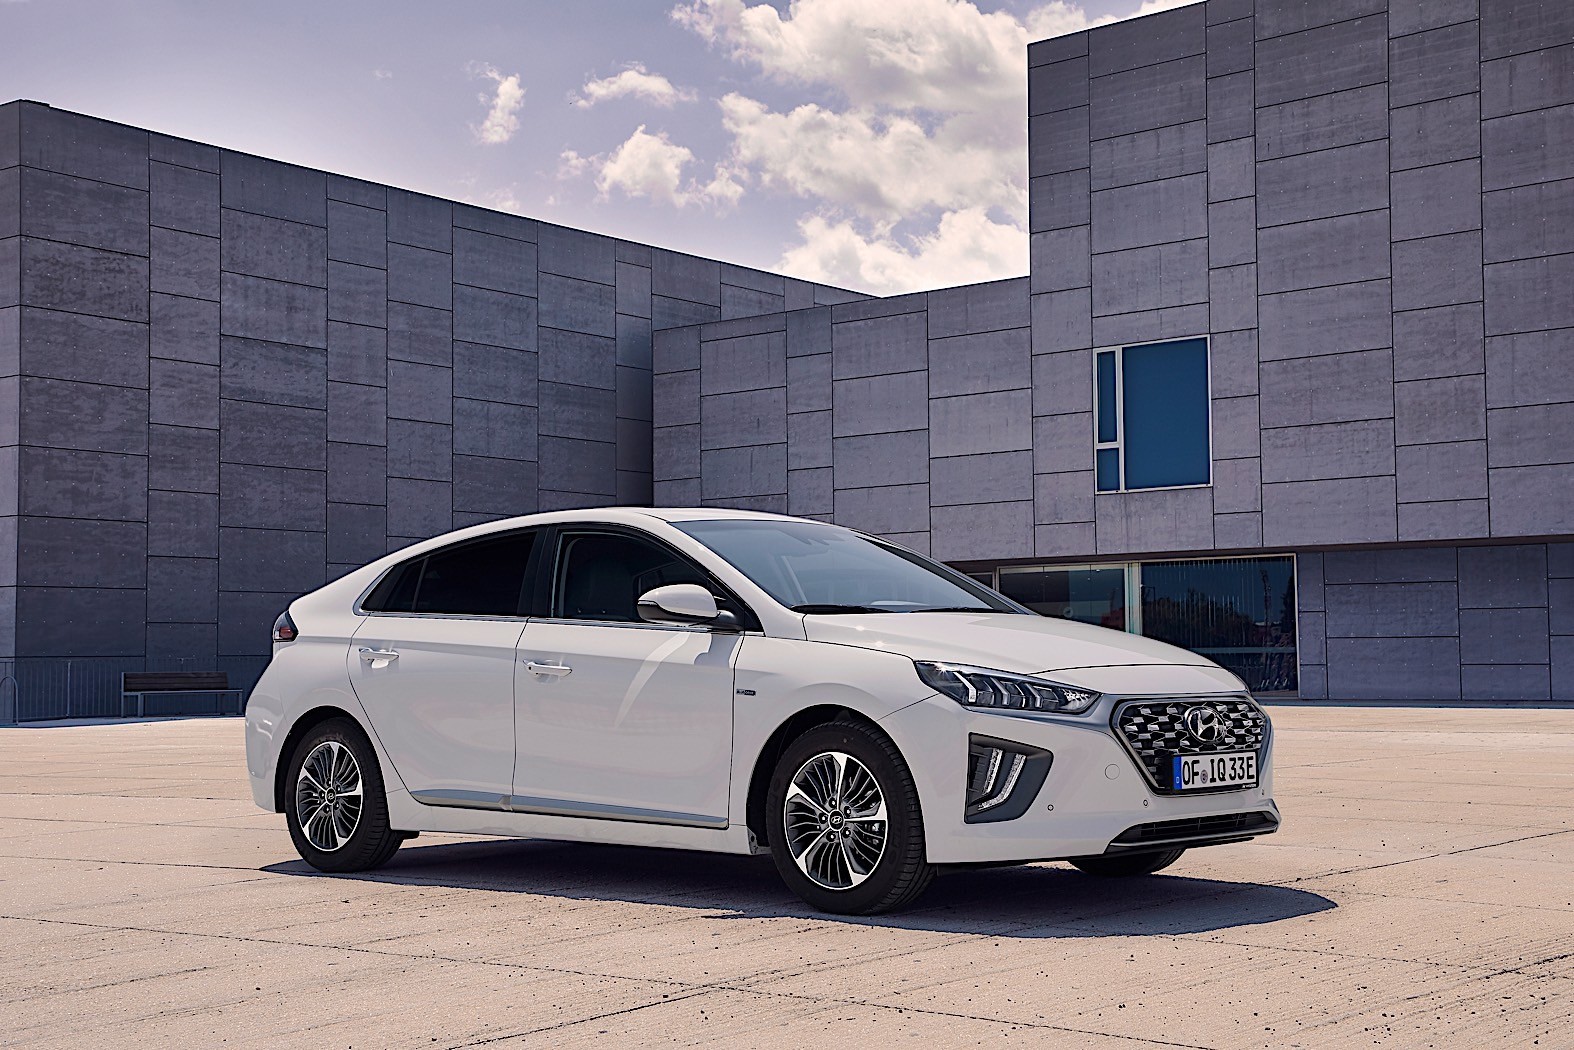 2020 Hyundai Ioniq Gets Updated, Comes with More Range and Connectivity